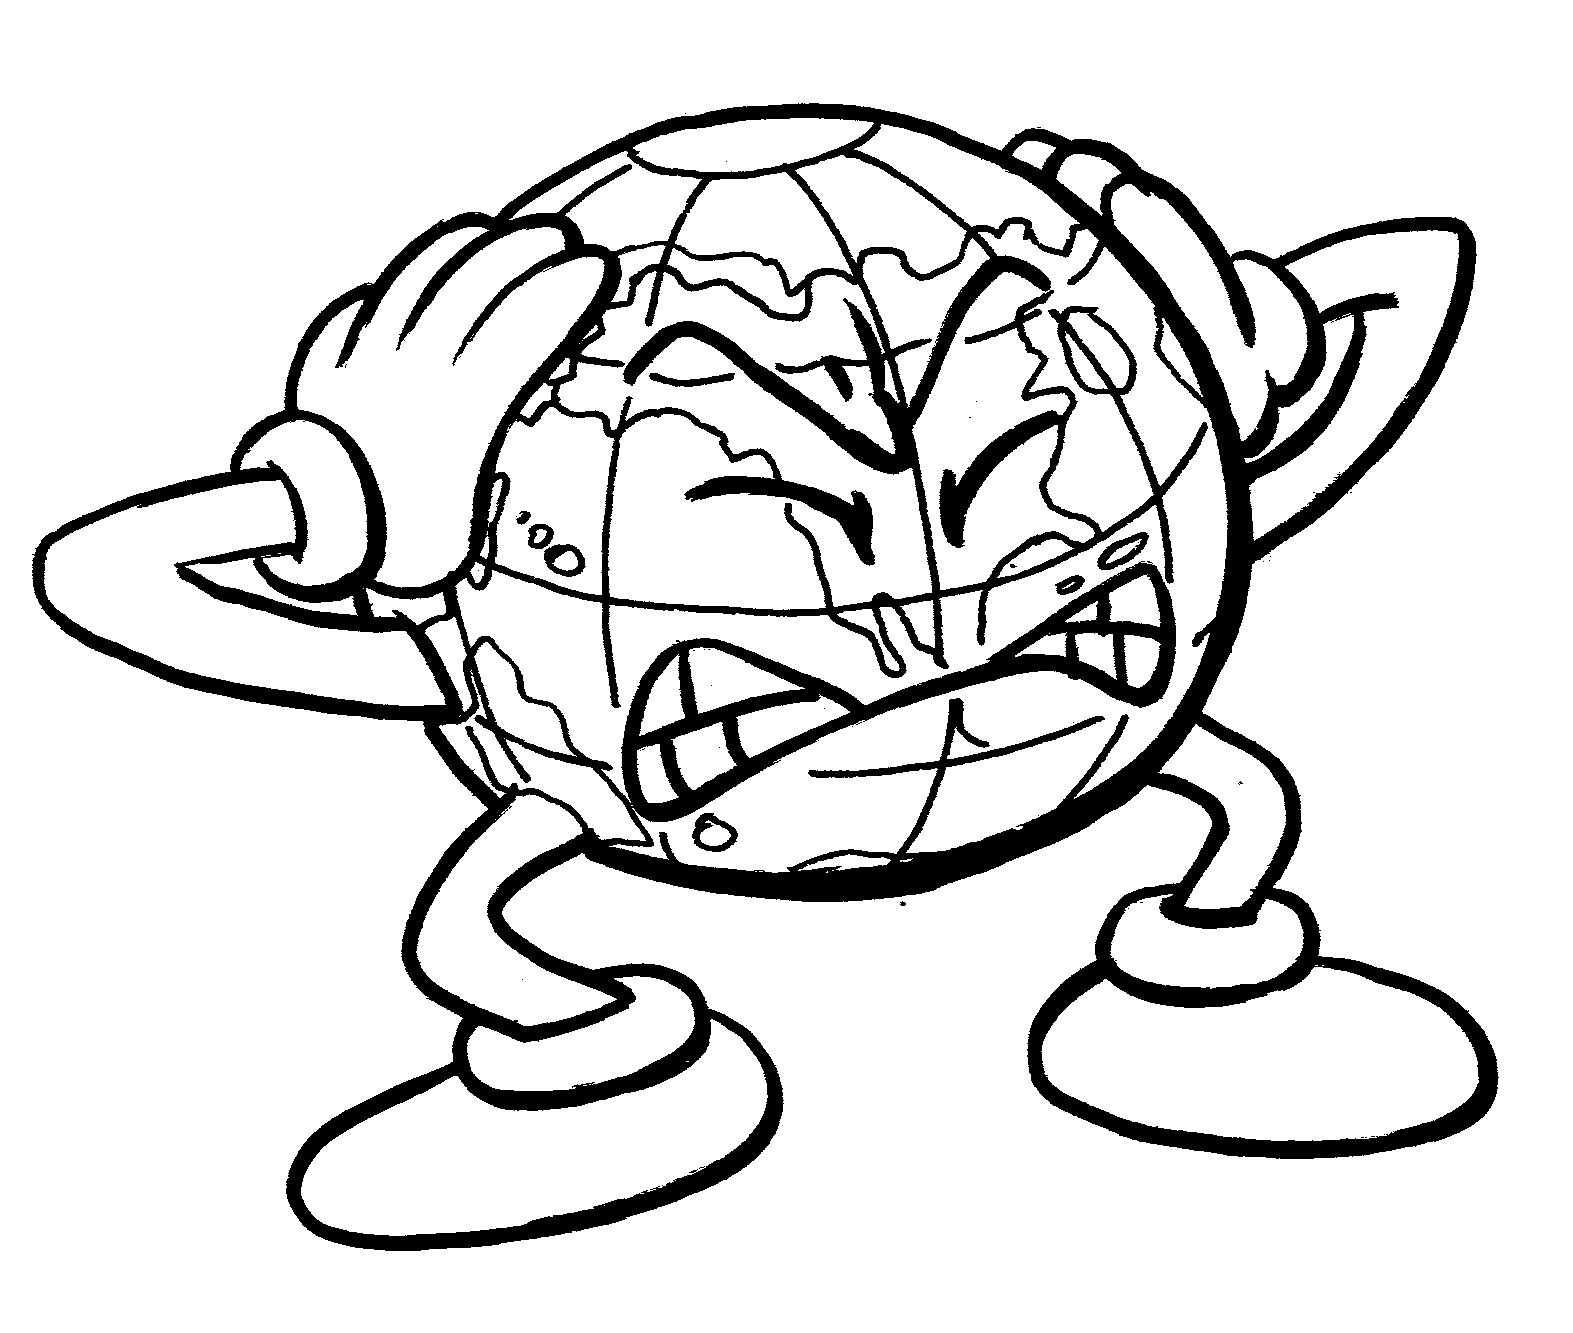 free-land-pollution-coloring-pages-download-free-land-pollution